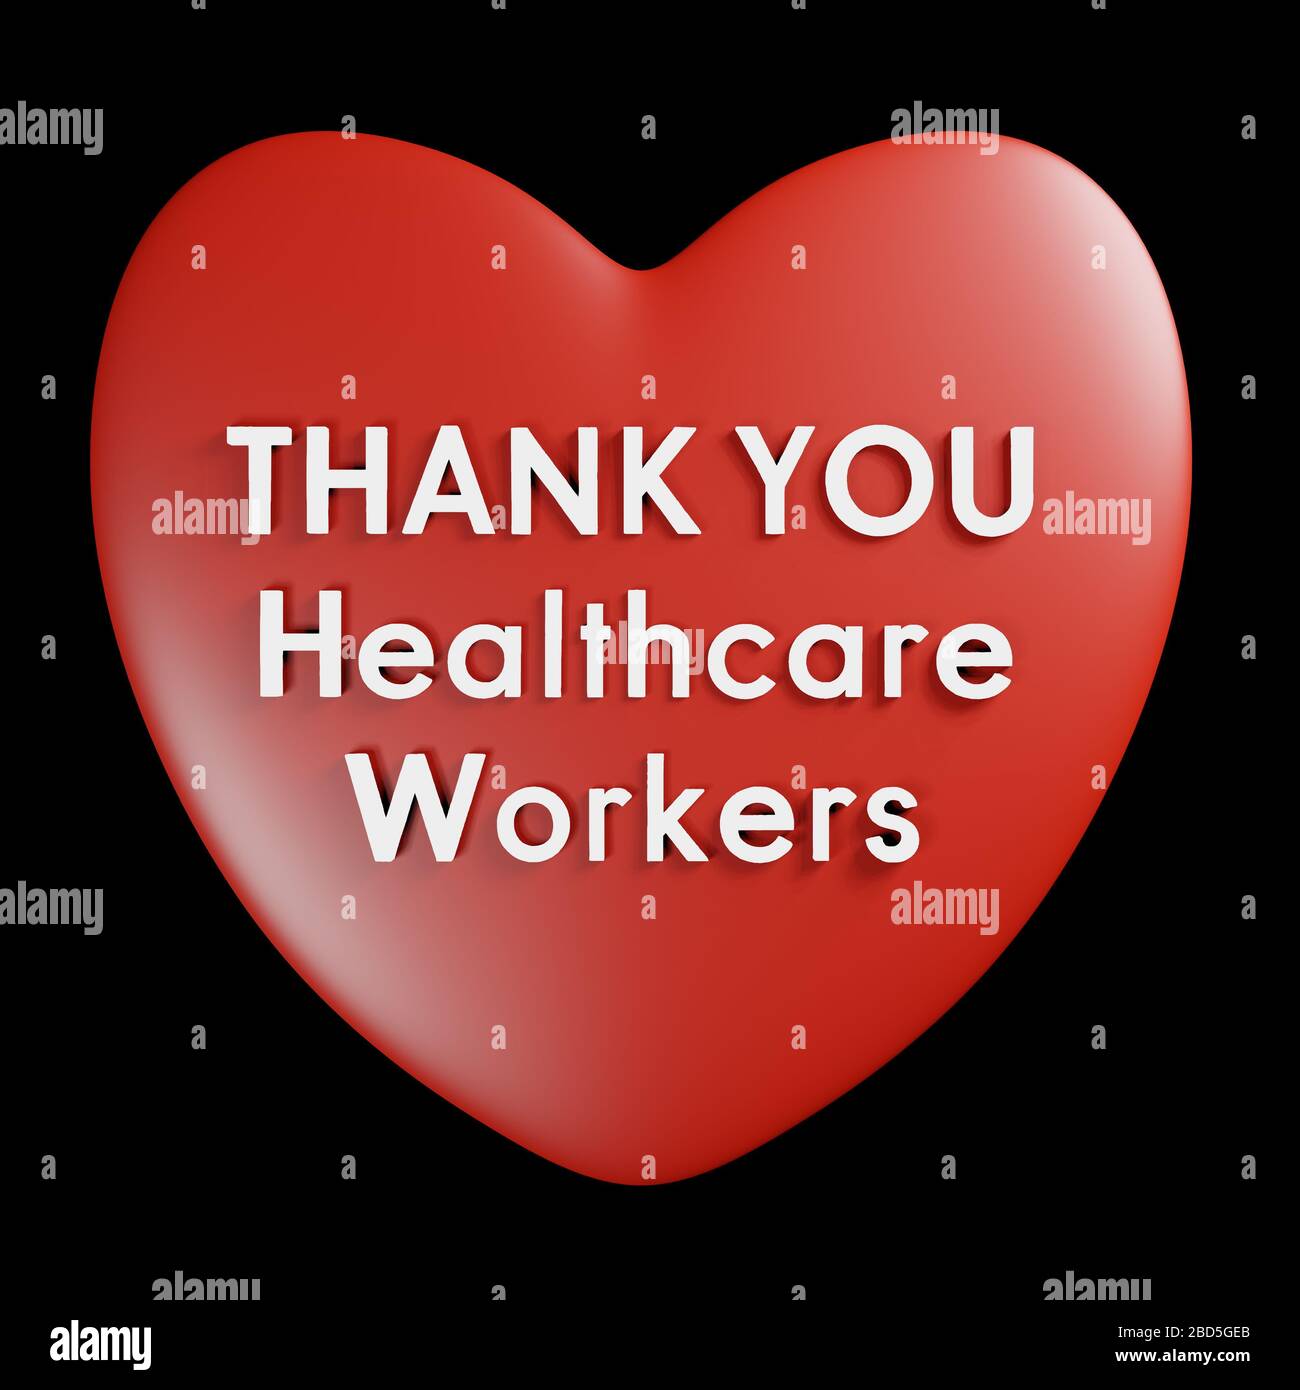 Thank You Healthcare Workers banner, appreciation of the effort of medical healthcare workers during the Covid-19 Coronavirus pandemic, Illustration Stock Photo